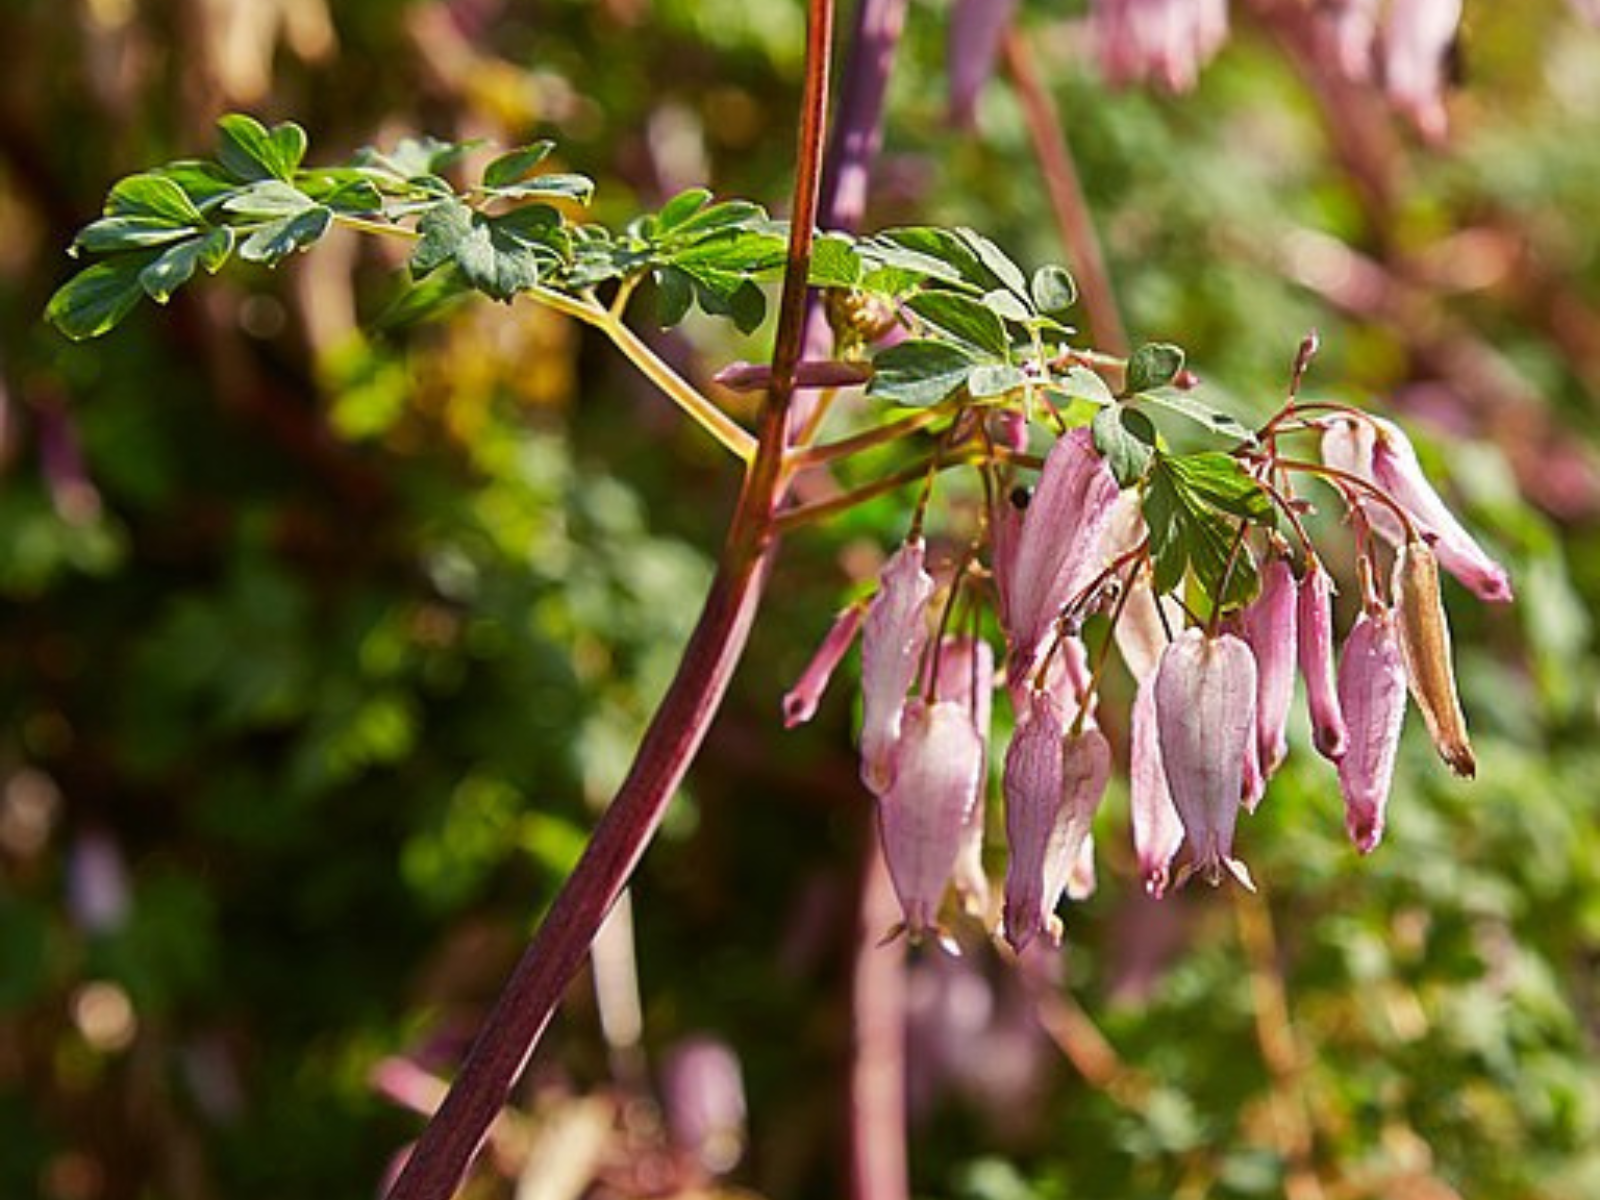 Branch of a plant with clusters of dusty pink oblong flowers hanging below small spreading leaves.